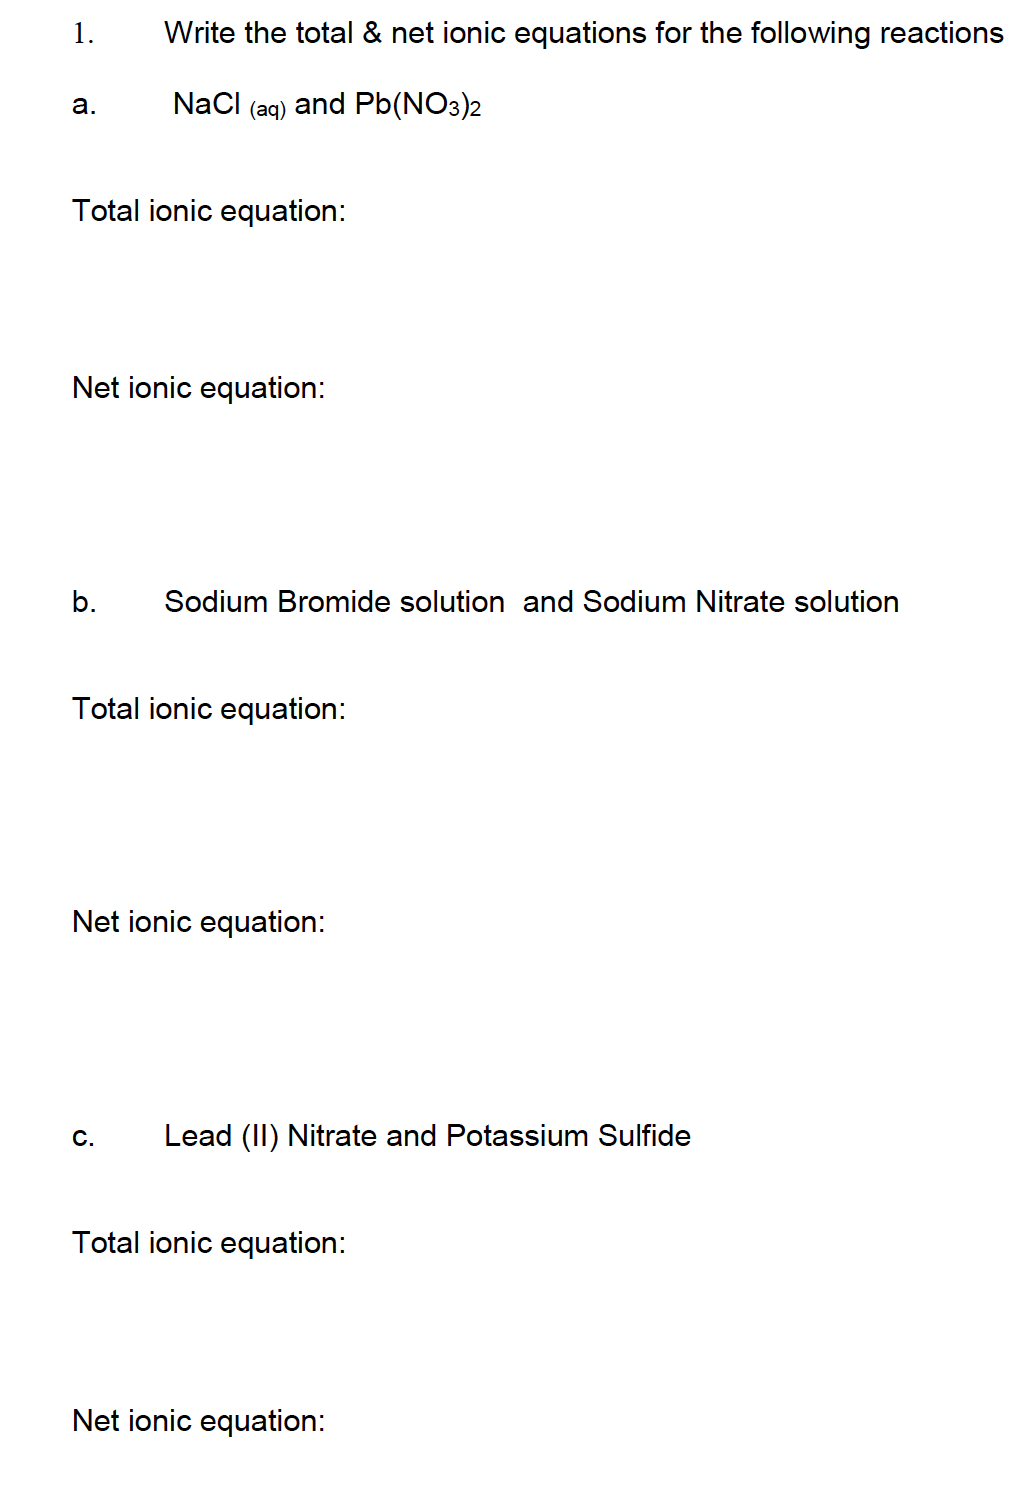 1.
a.
Write the total & net ionic equations for the following reactions
NaCl (aq) and Pb(NO3)2
Total ionic equation:
Net ionic equation:
b. Sodium Bromide solution and Sodium Nitrate solution
Total ionic equation:
Net ionic equation:
C. Lead (II) Nitrate and Potassium Sulfide
Total ionic equation:
Net ionic equation: